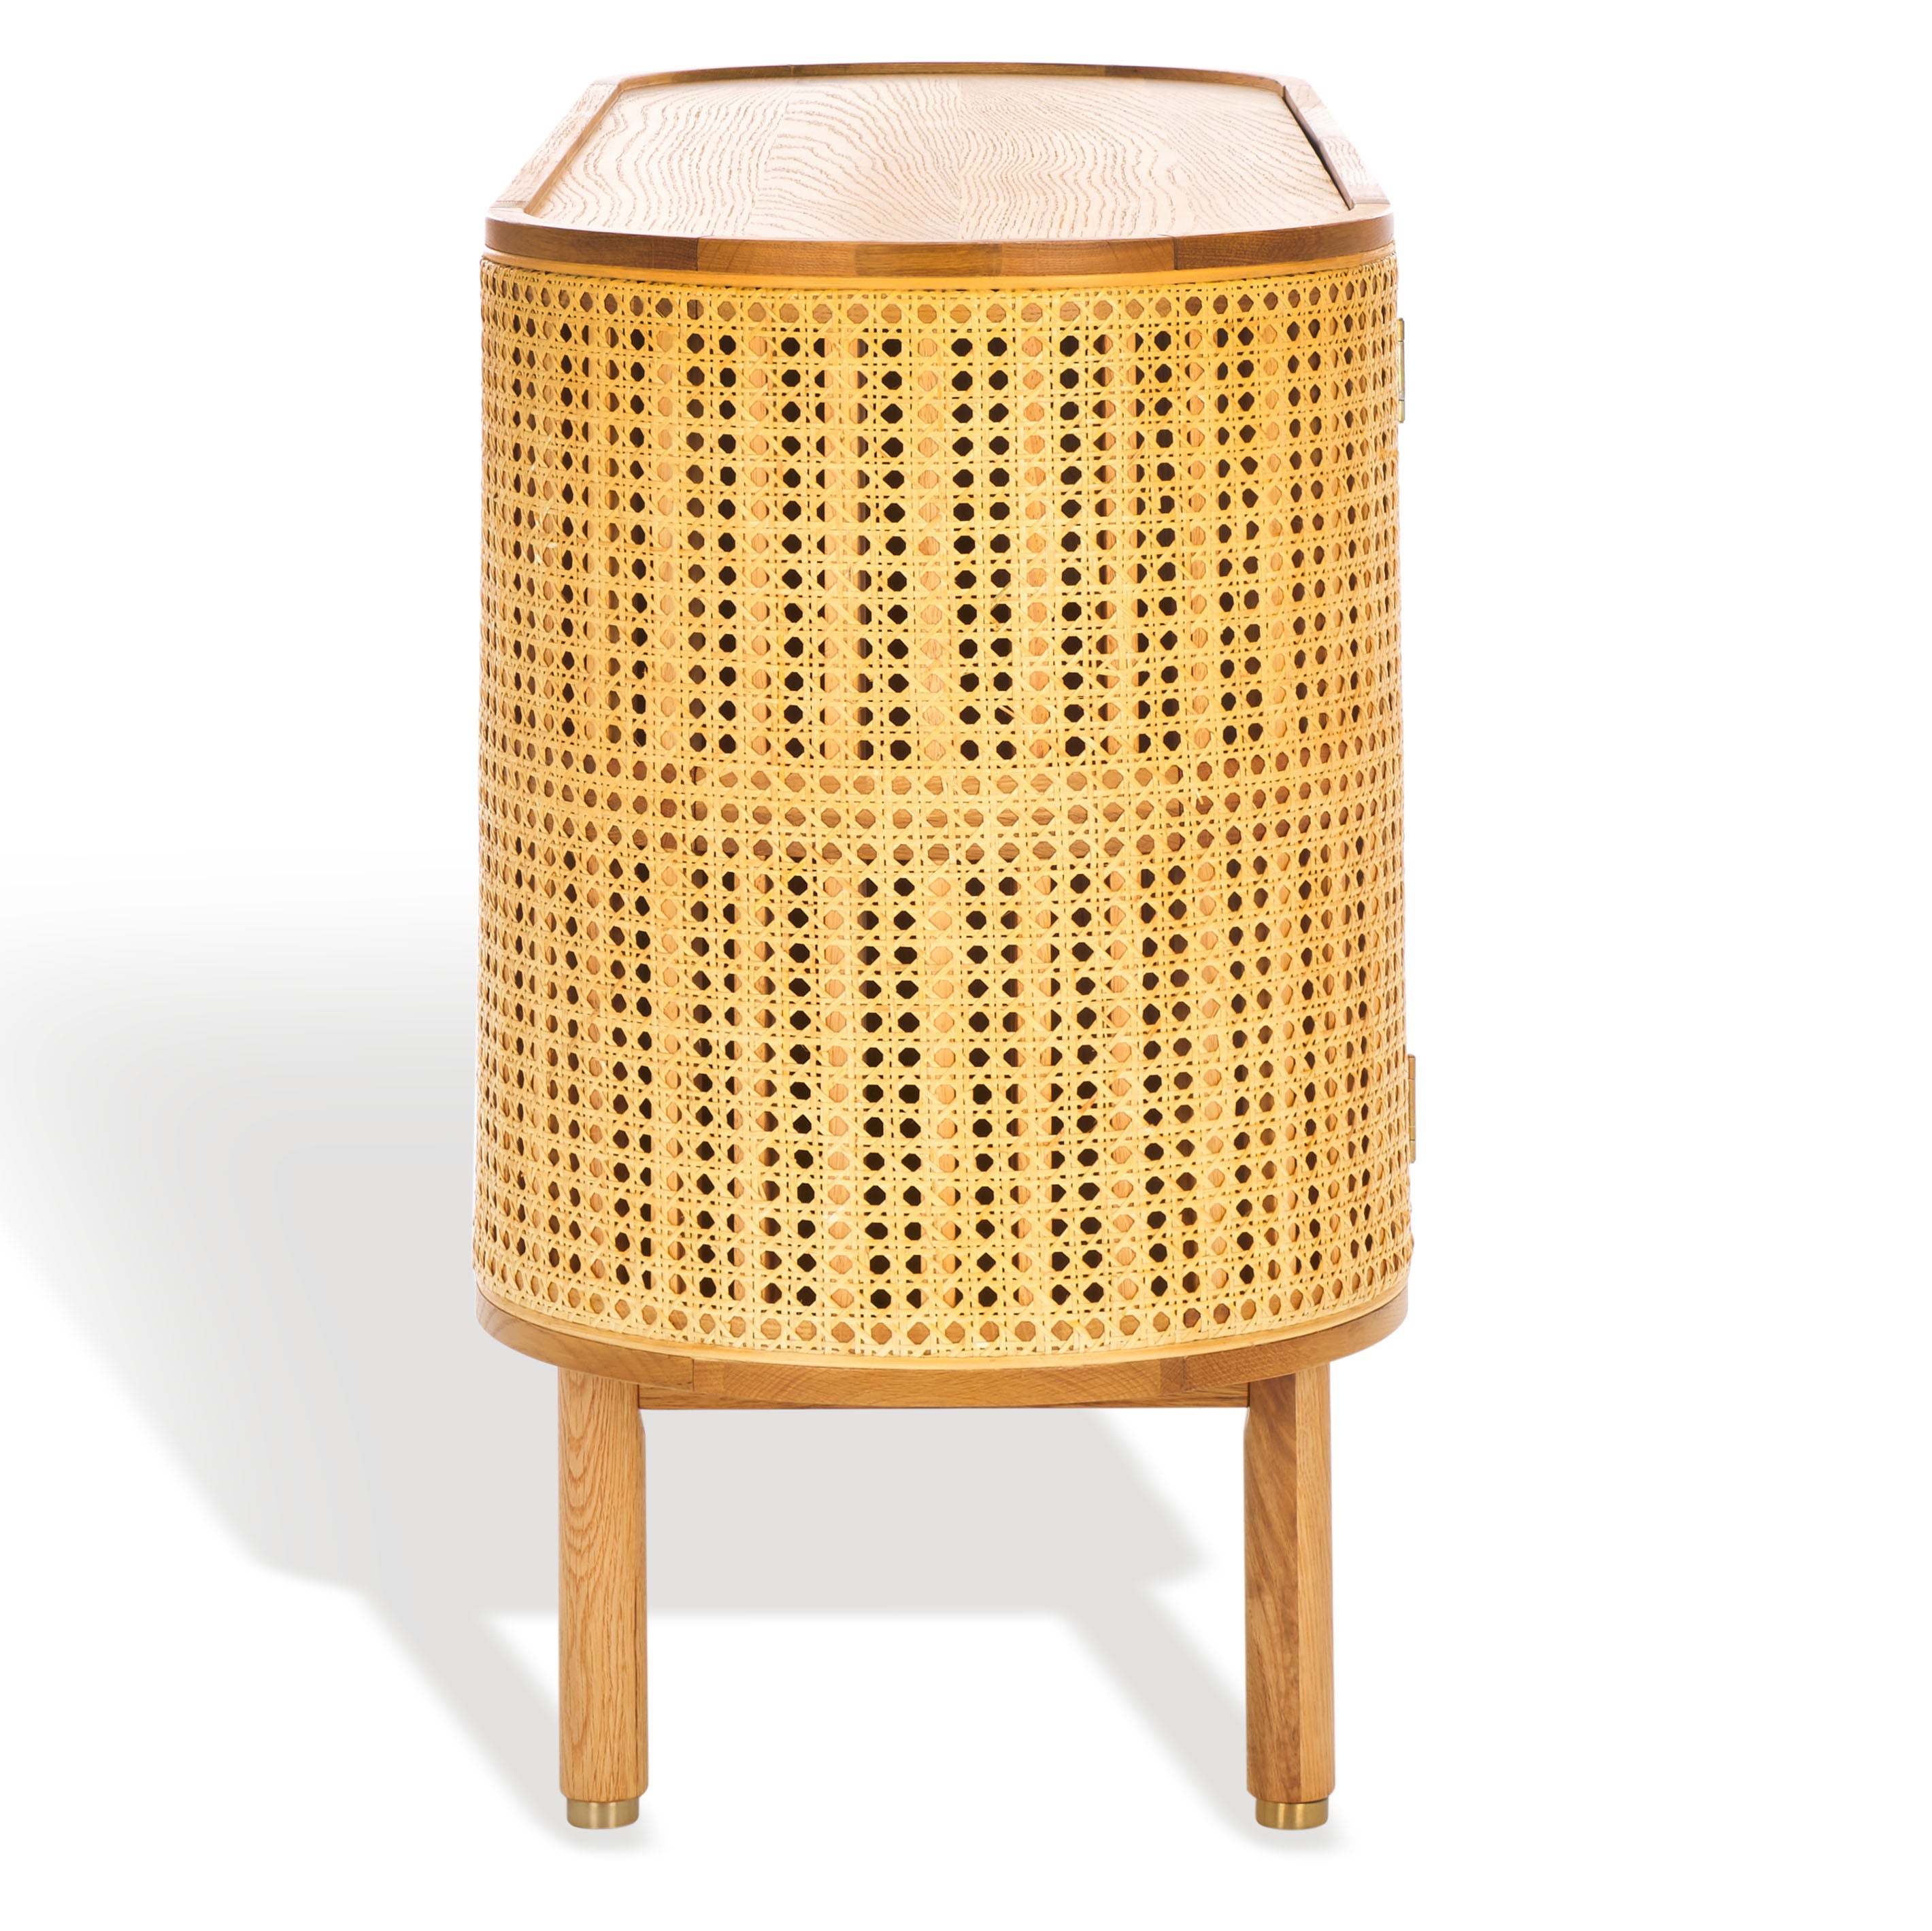 Safavieh Couture Dolly Cane And Wood Sideboard, SFV4204